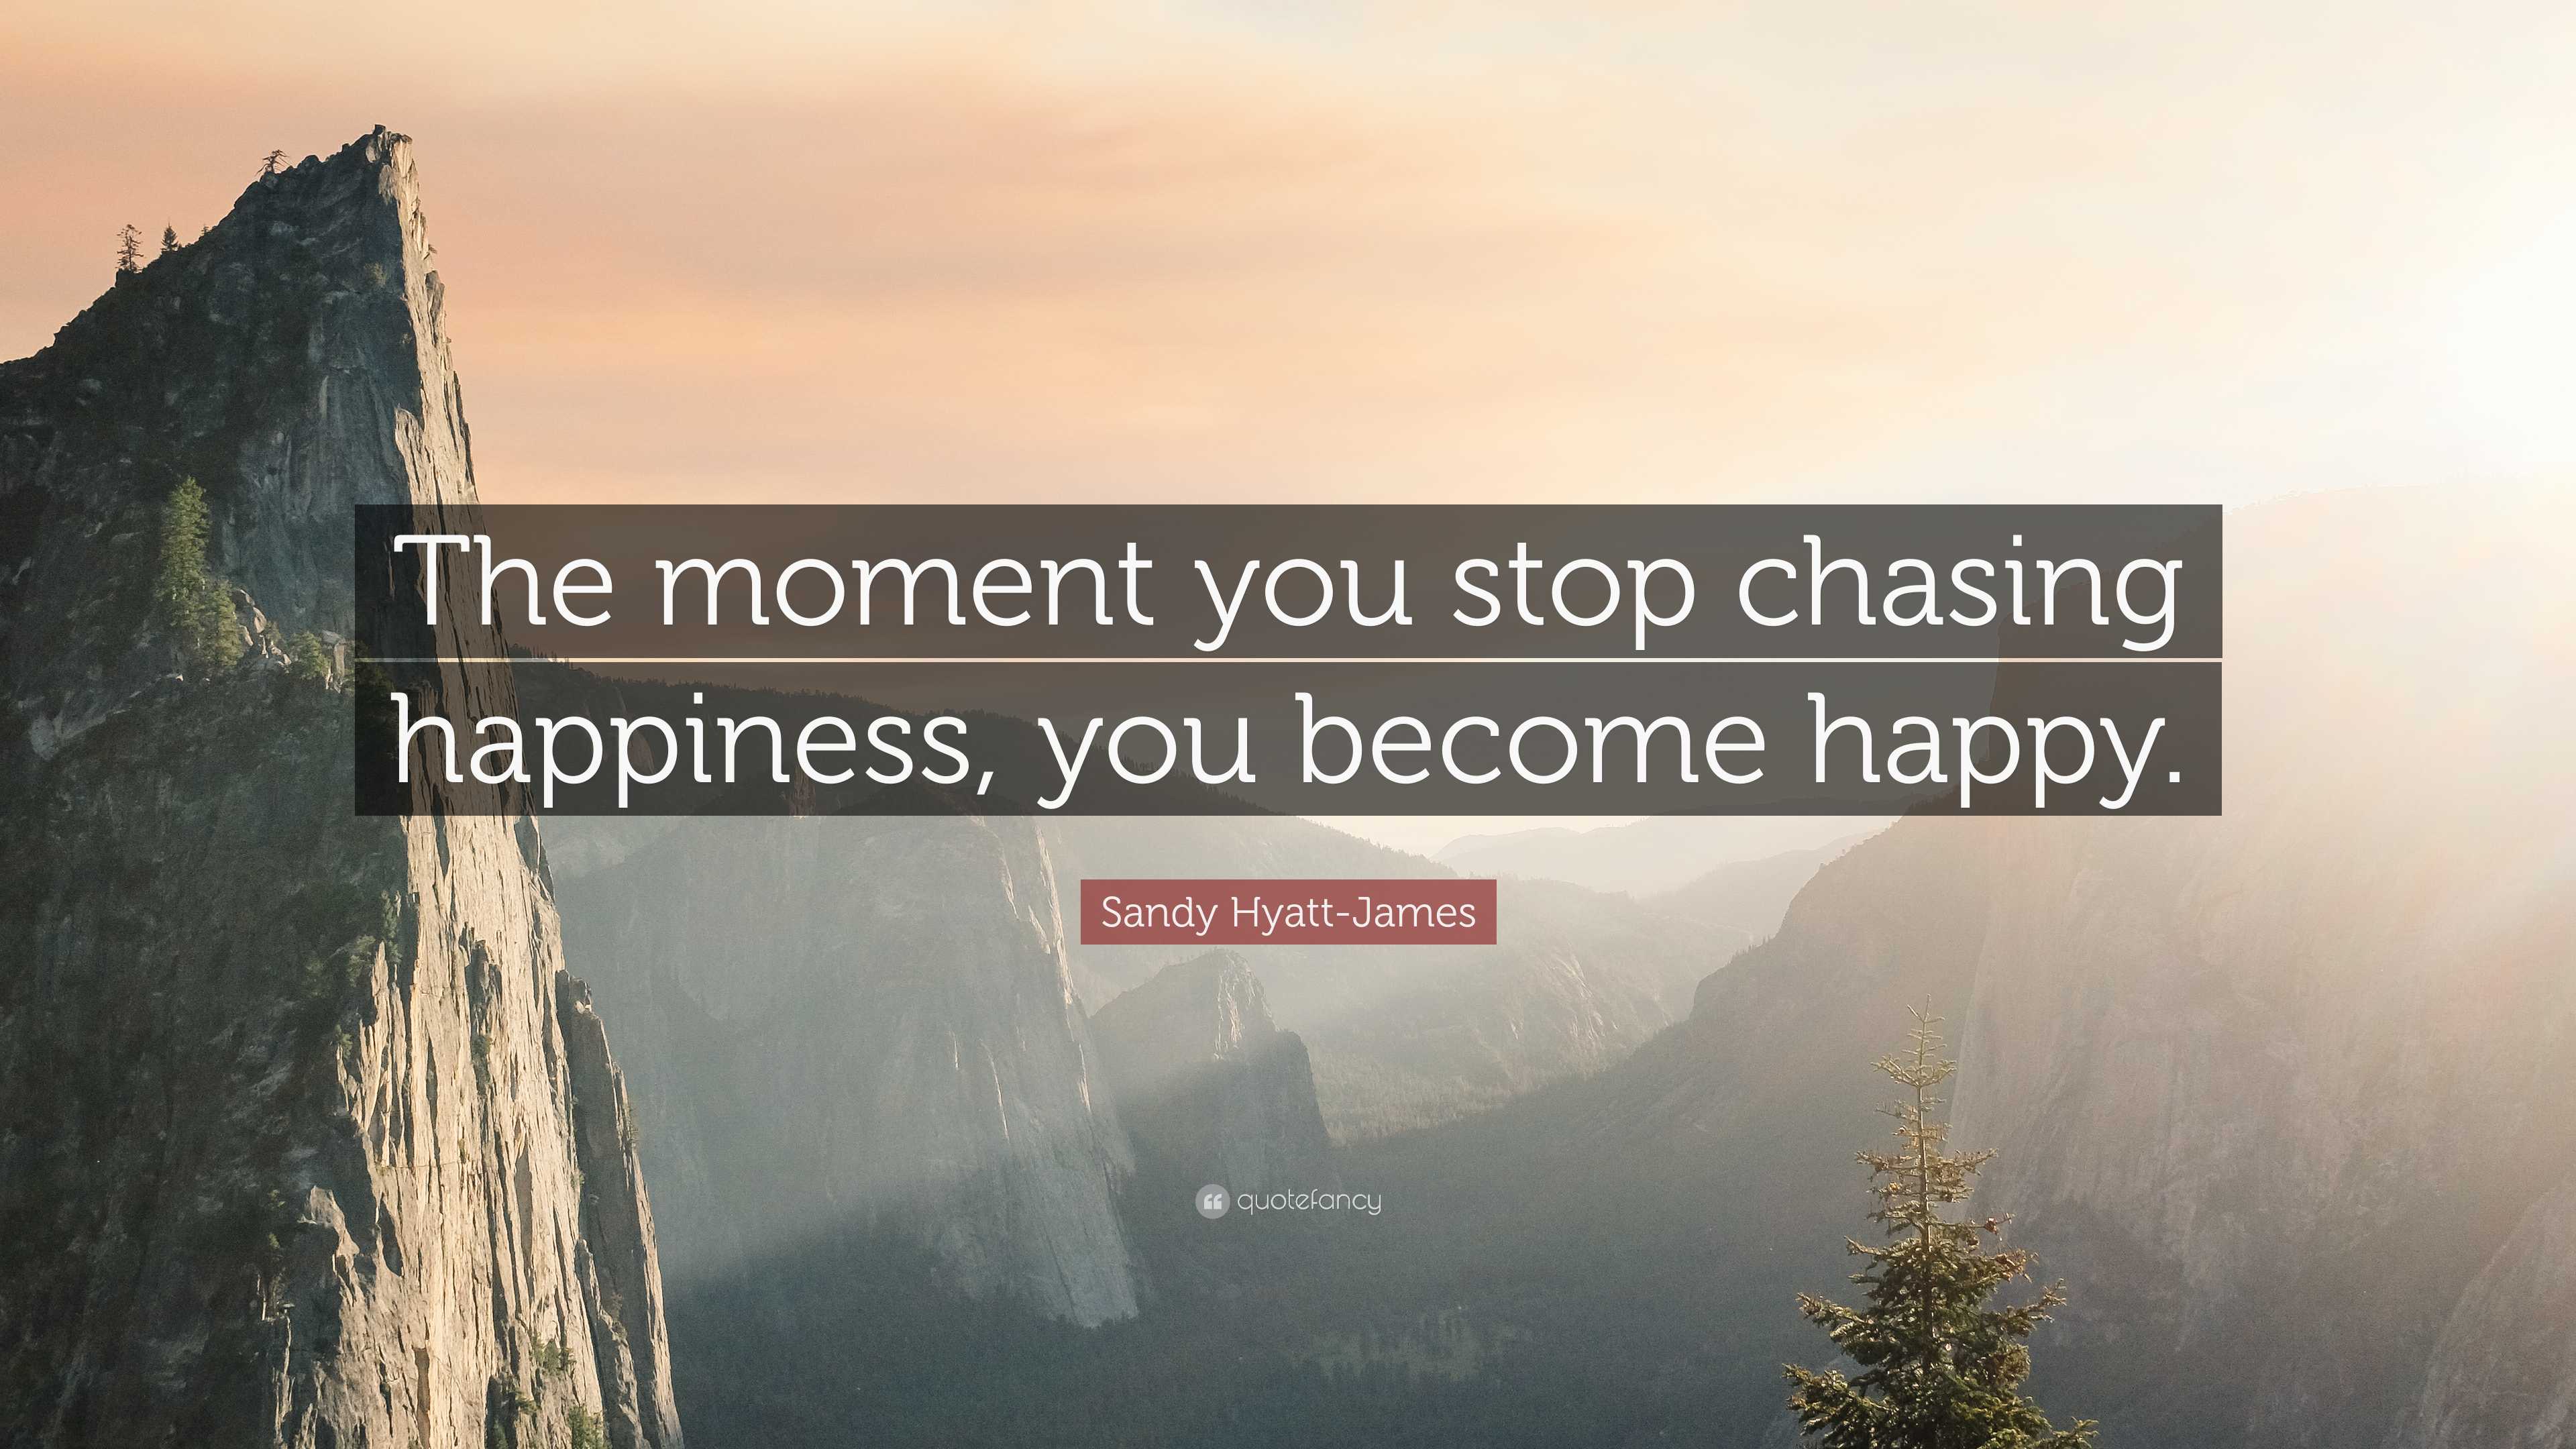 How I Stopped Chasing Happiness and Started Enjoying My Imperfect Life